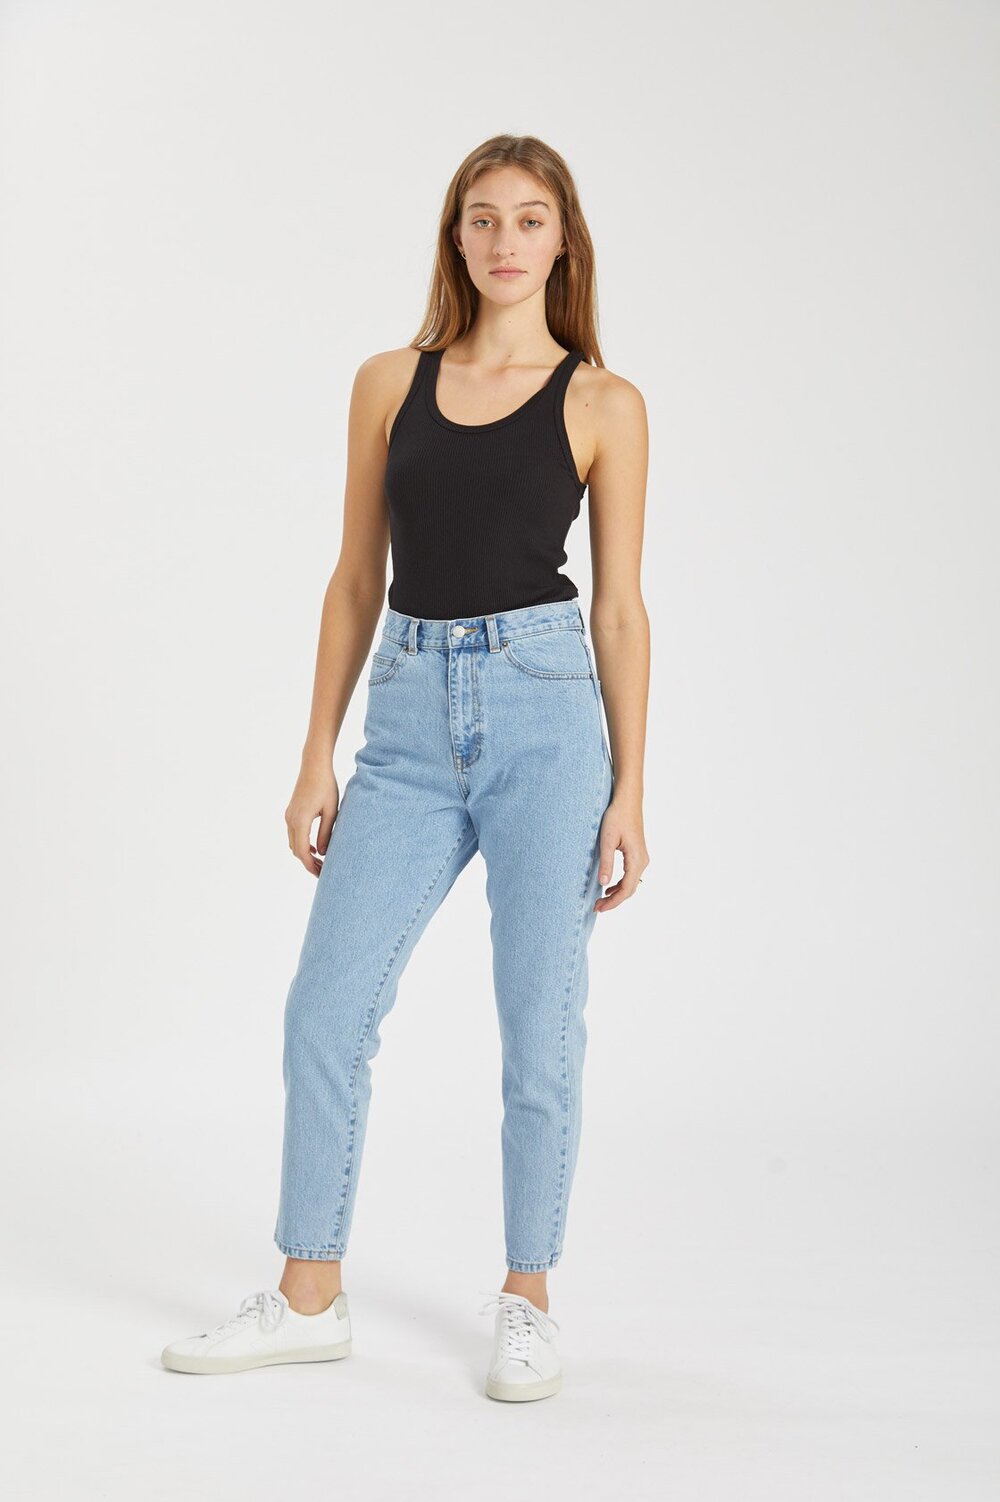 Dr Nora Jeans in Light Retro Blue – Miss Gladys Sym Choon